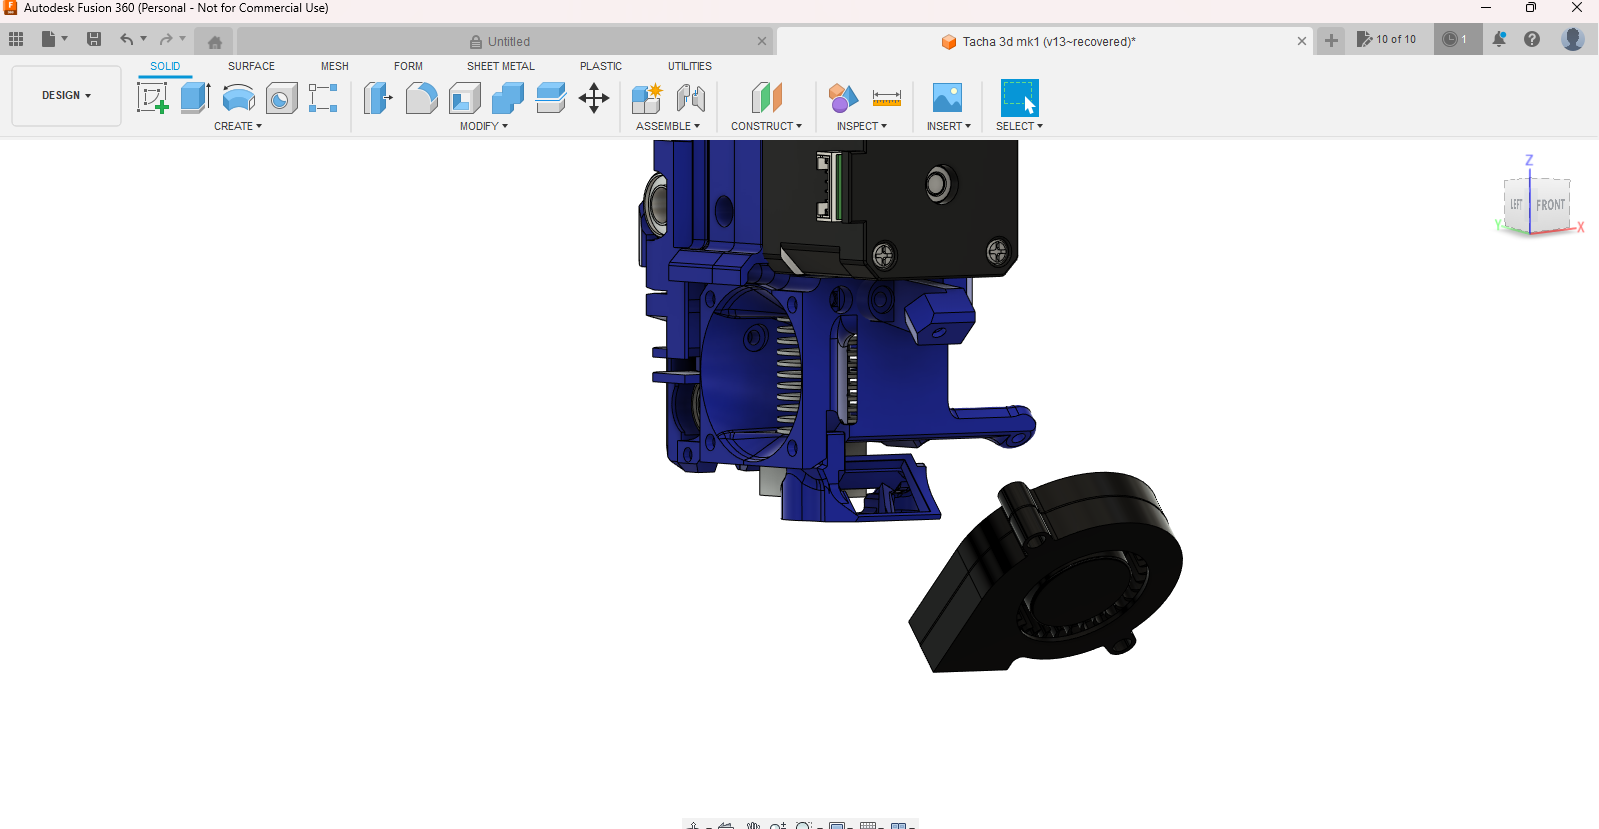 Autodesk Fusion 360 (Personal - Not for Commercial Use) 6_29_2023 10_12_03 PM.png